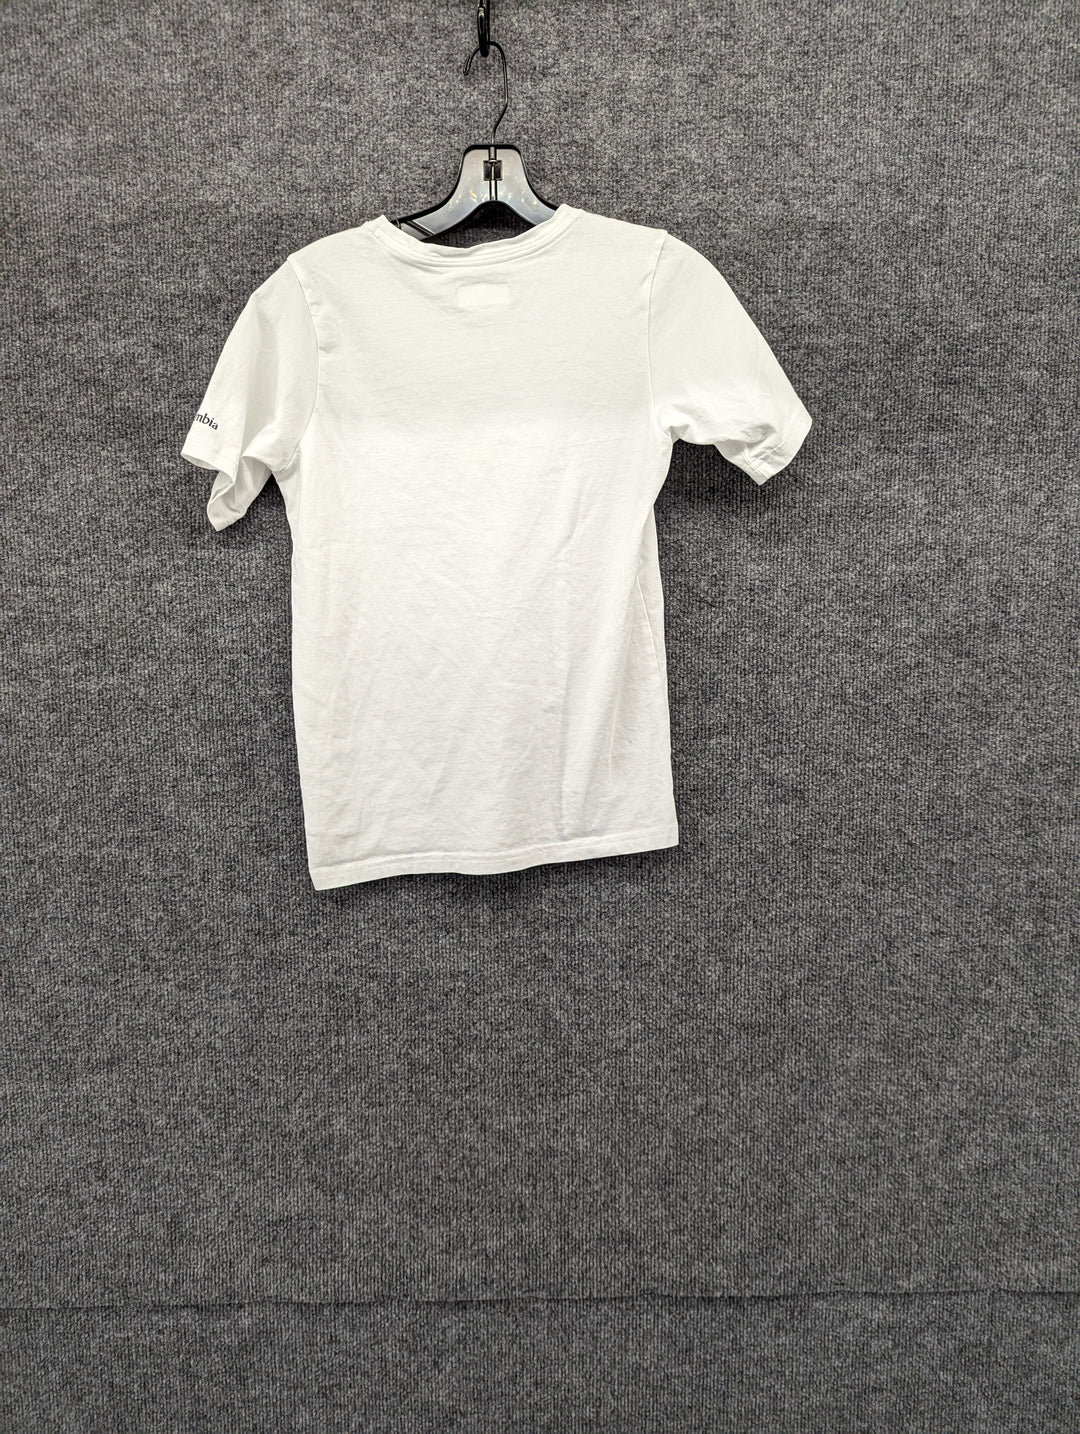 Size Y Large Youth S/S Shirt